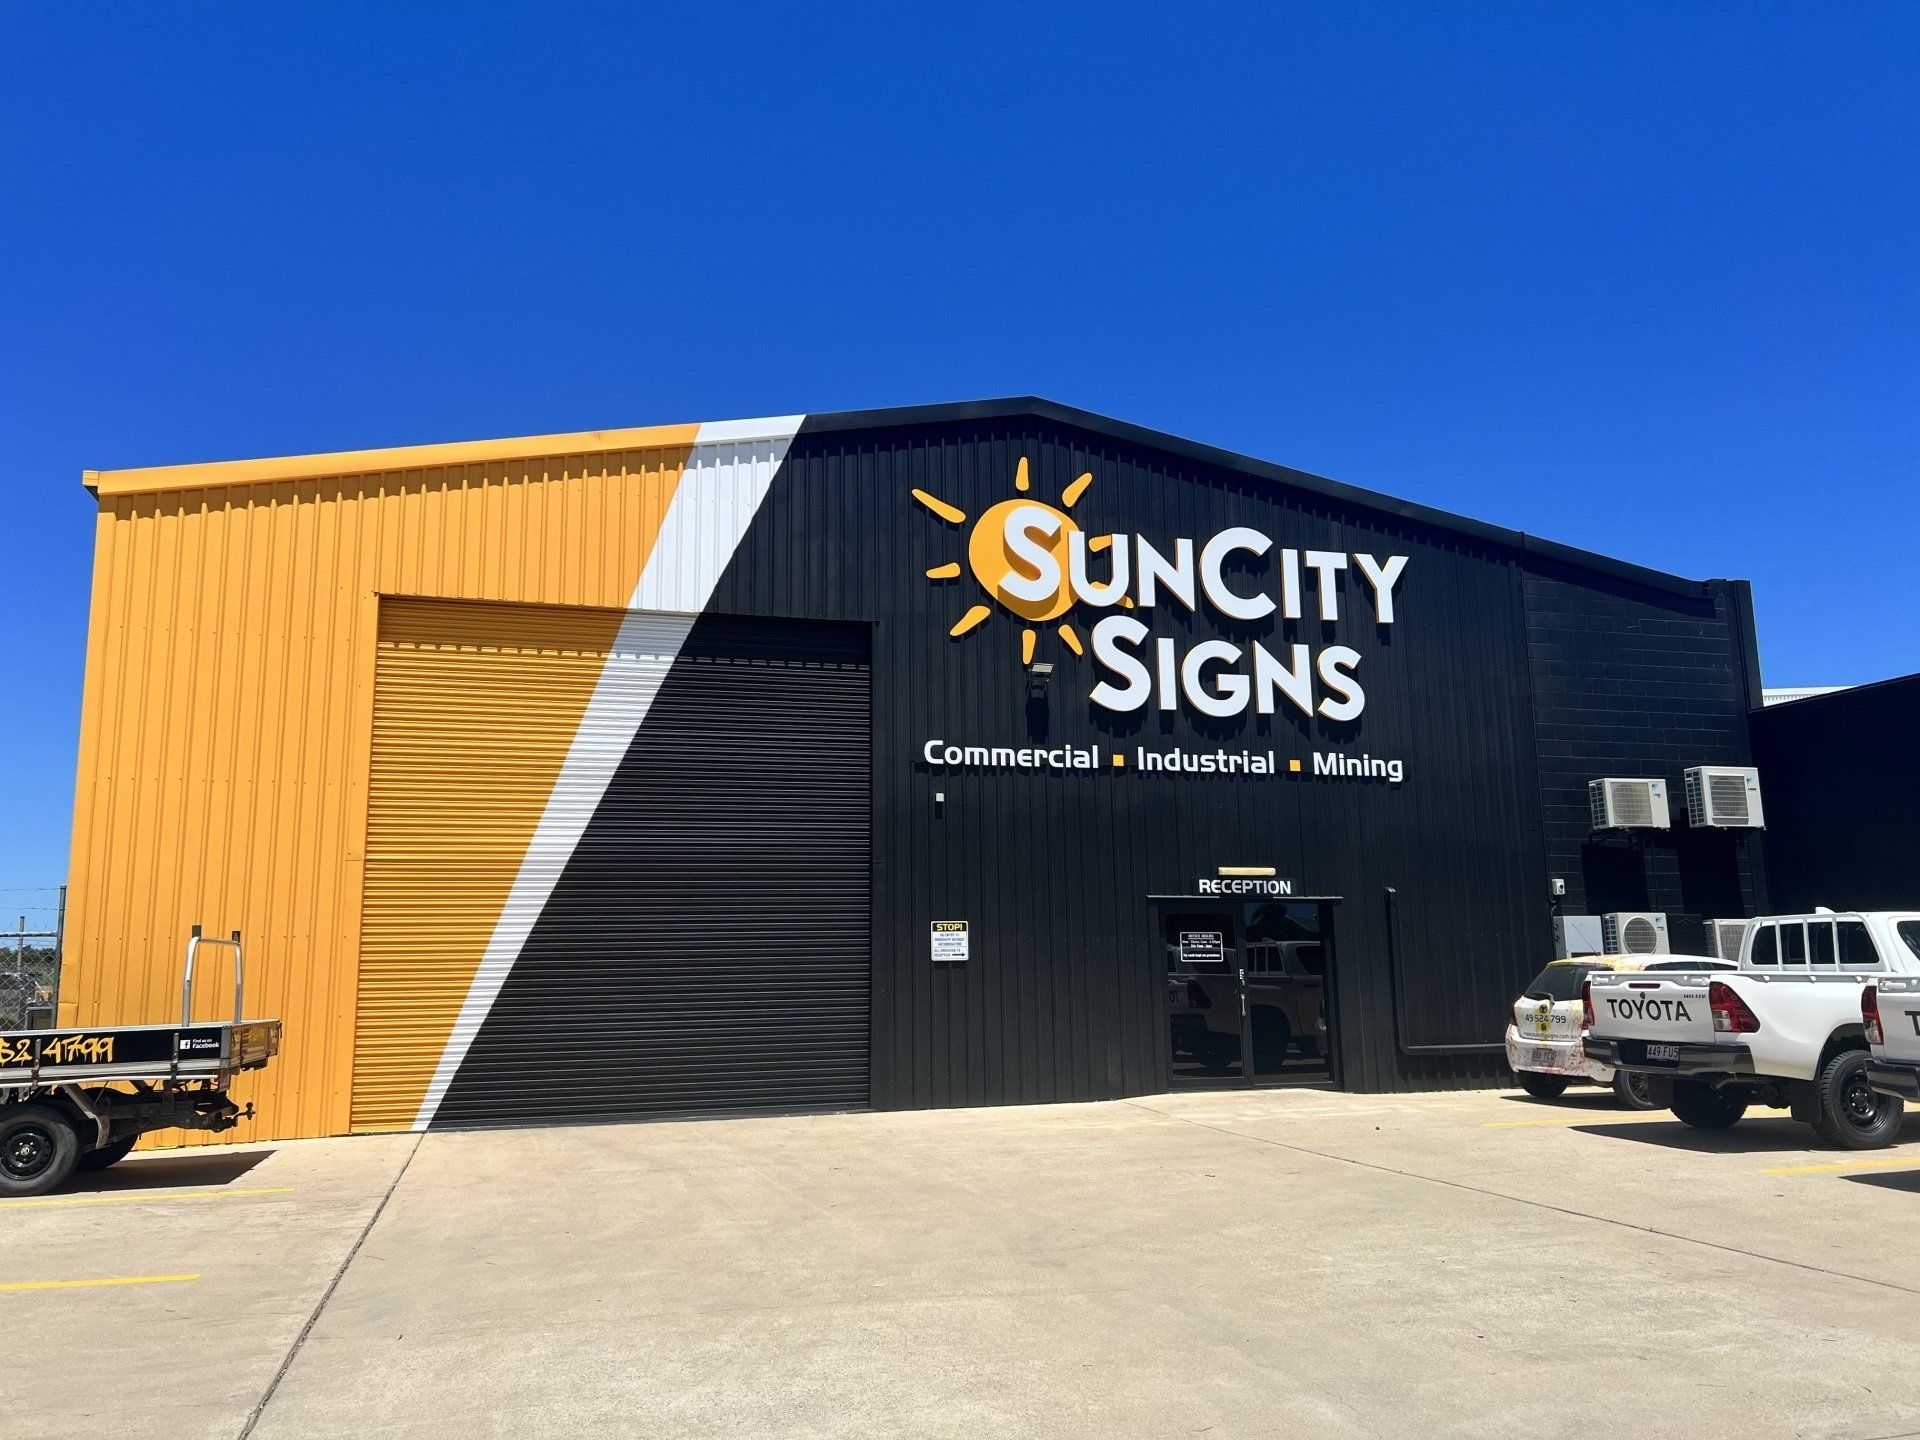 Sun City Signs Staff Installing the Signs | Sign Writers in Mackay | Sun City Signs